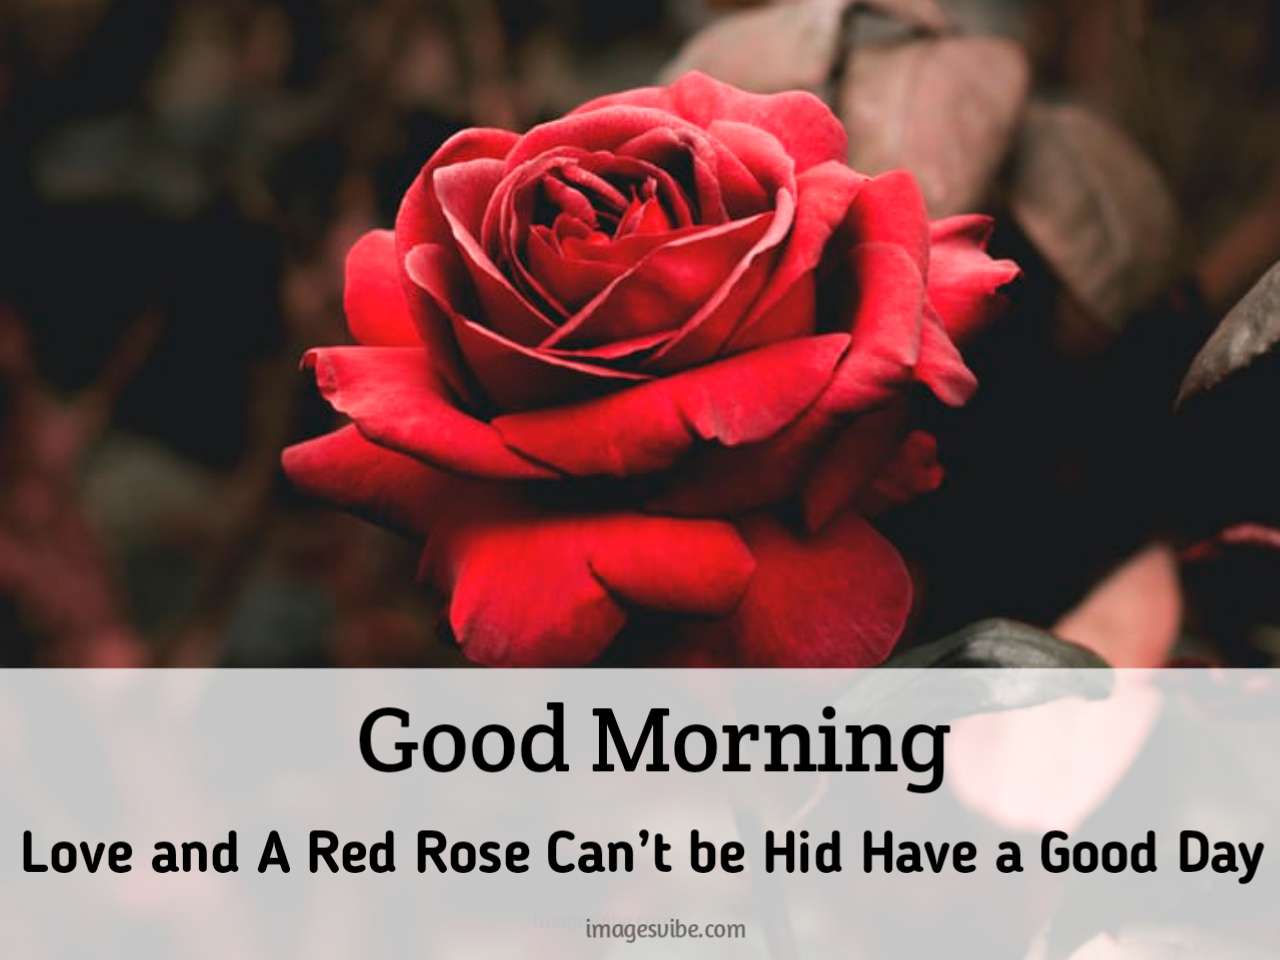 Beautiful Rose Good Morning Images & Quotes in 2022 - Images Vibe